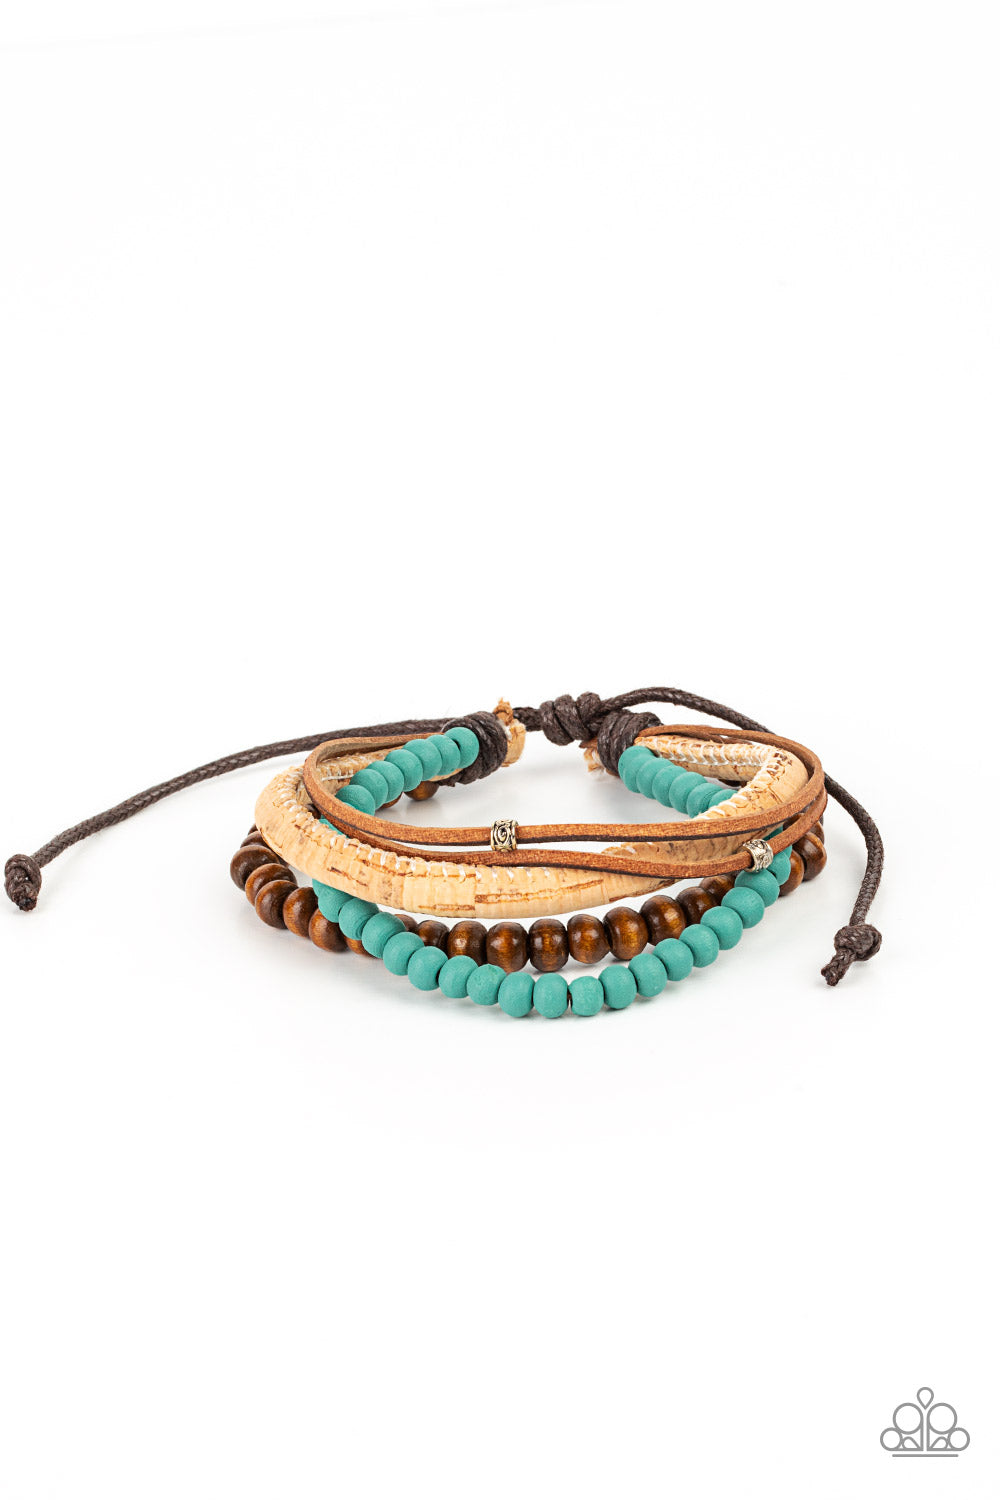 Featuring a strand of turquoise wooden beads, a collection of earthy strands of cork, leather, and wood, comes together for a simple handmade feel as it stacks up the wrist. Features an adjustable sliding knot closure.